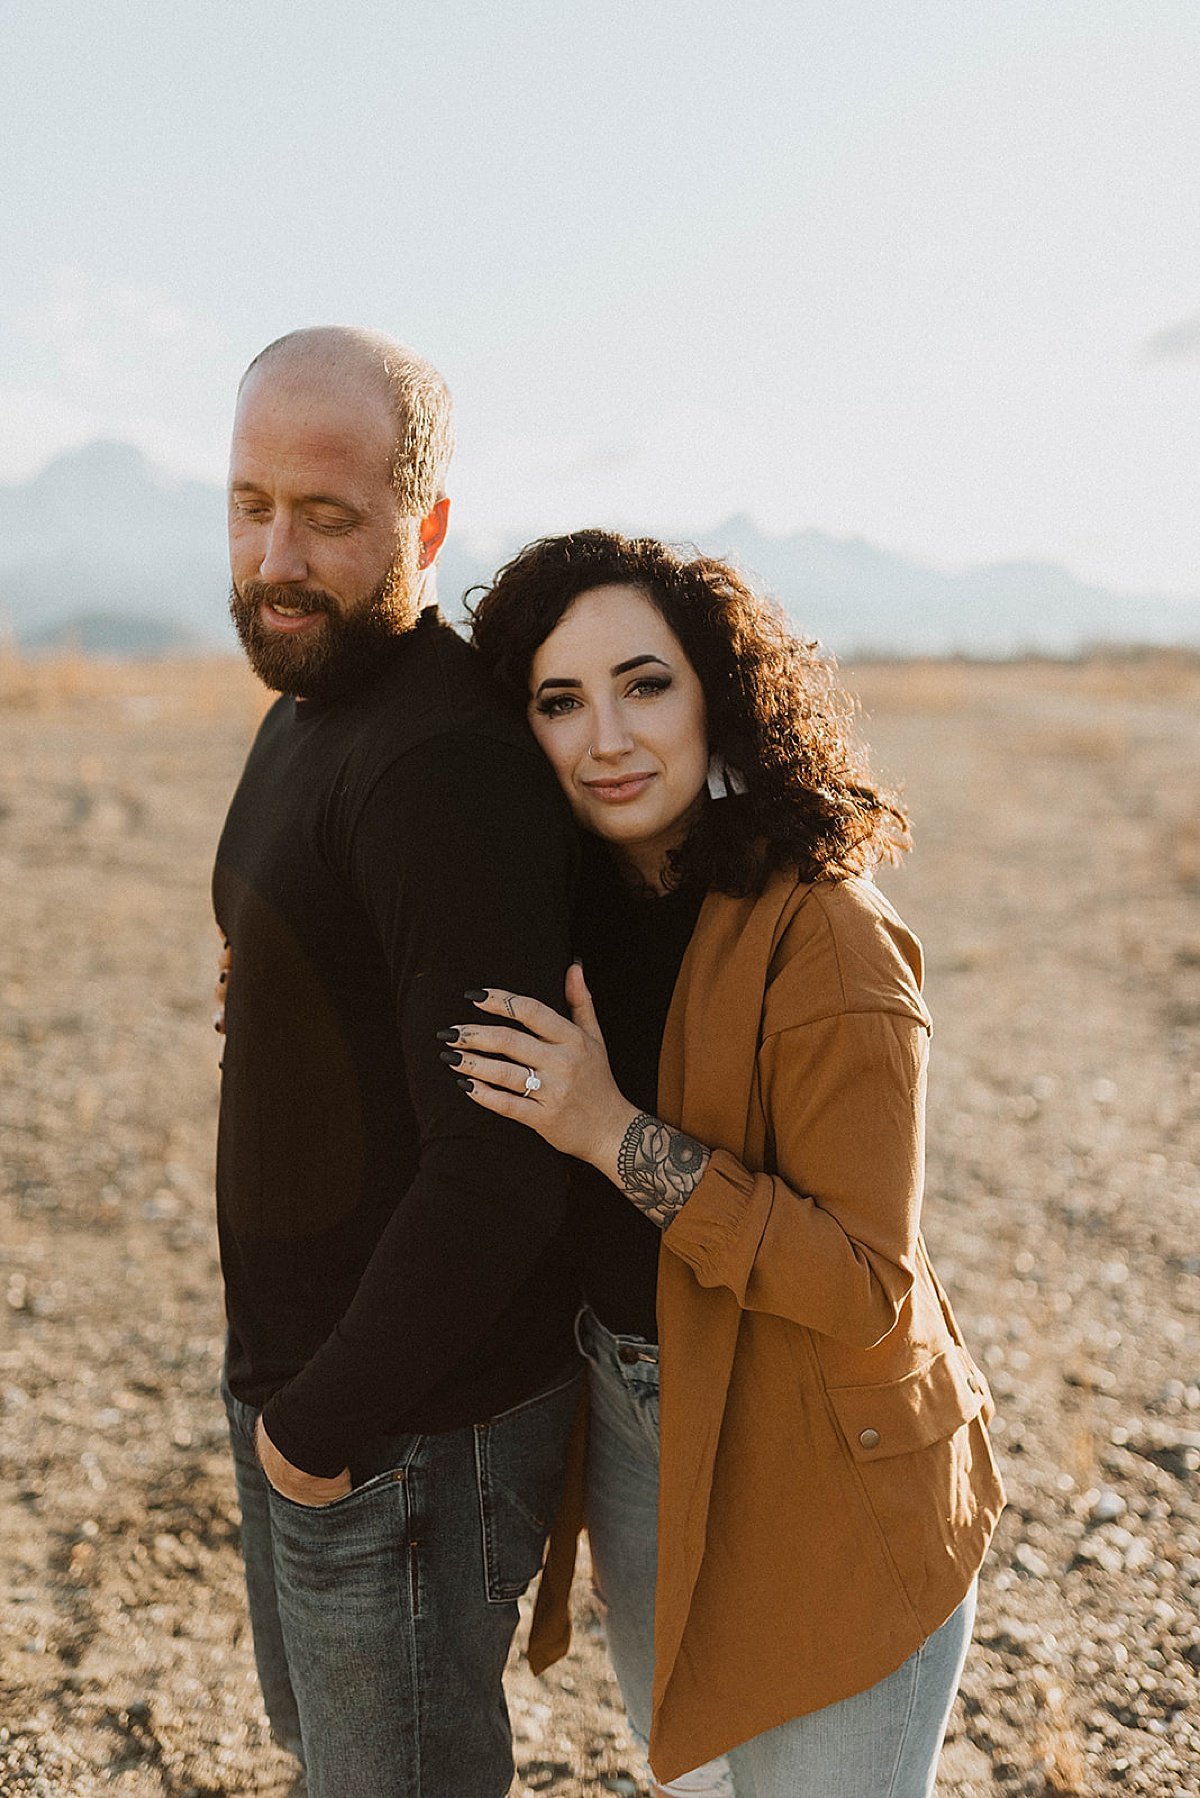  Man and woman embrace during warm sunset engagement shoot in alaska mountain park  